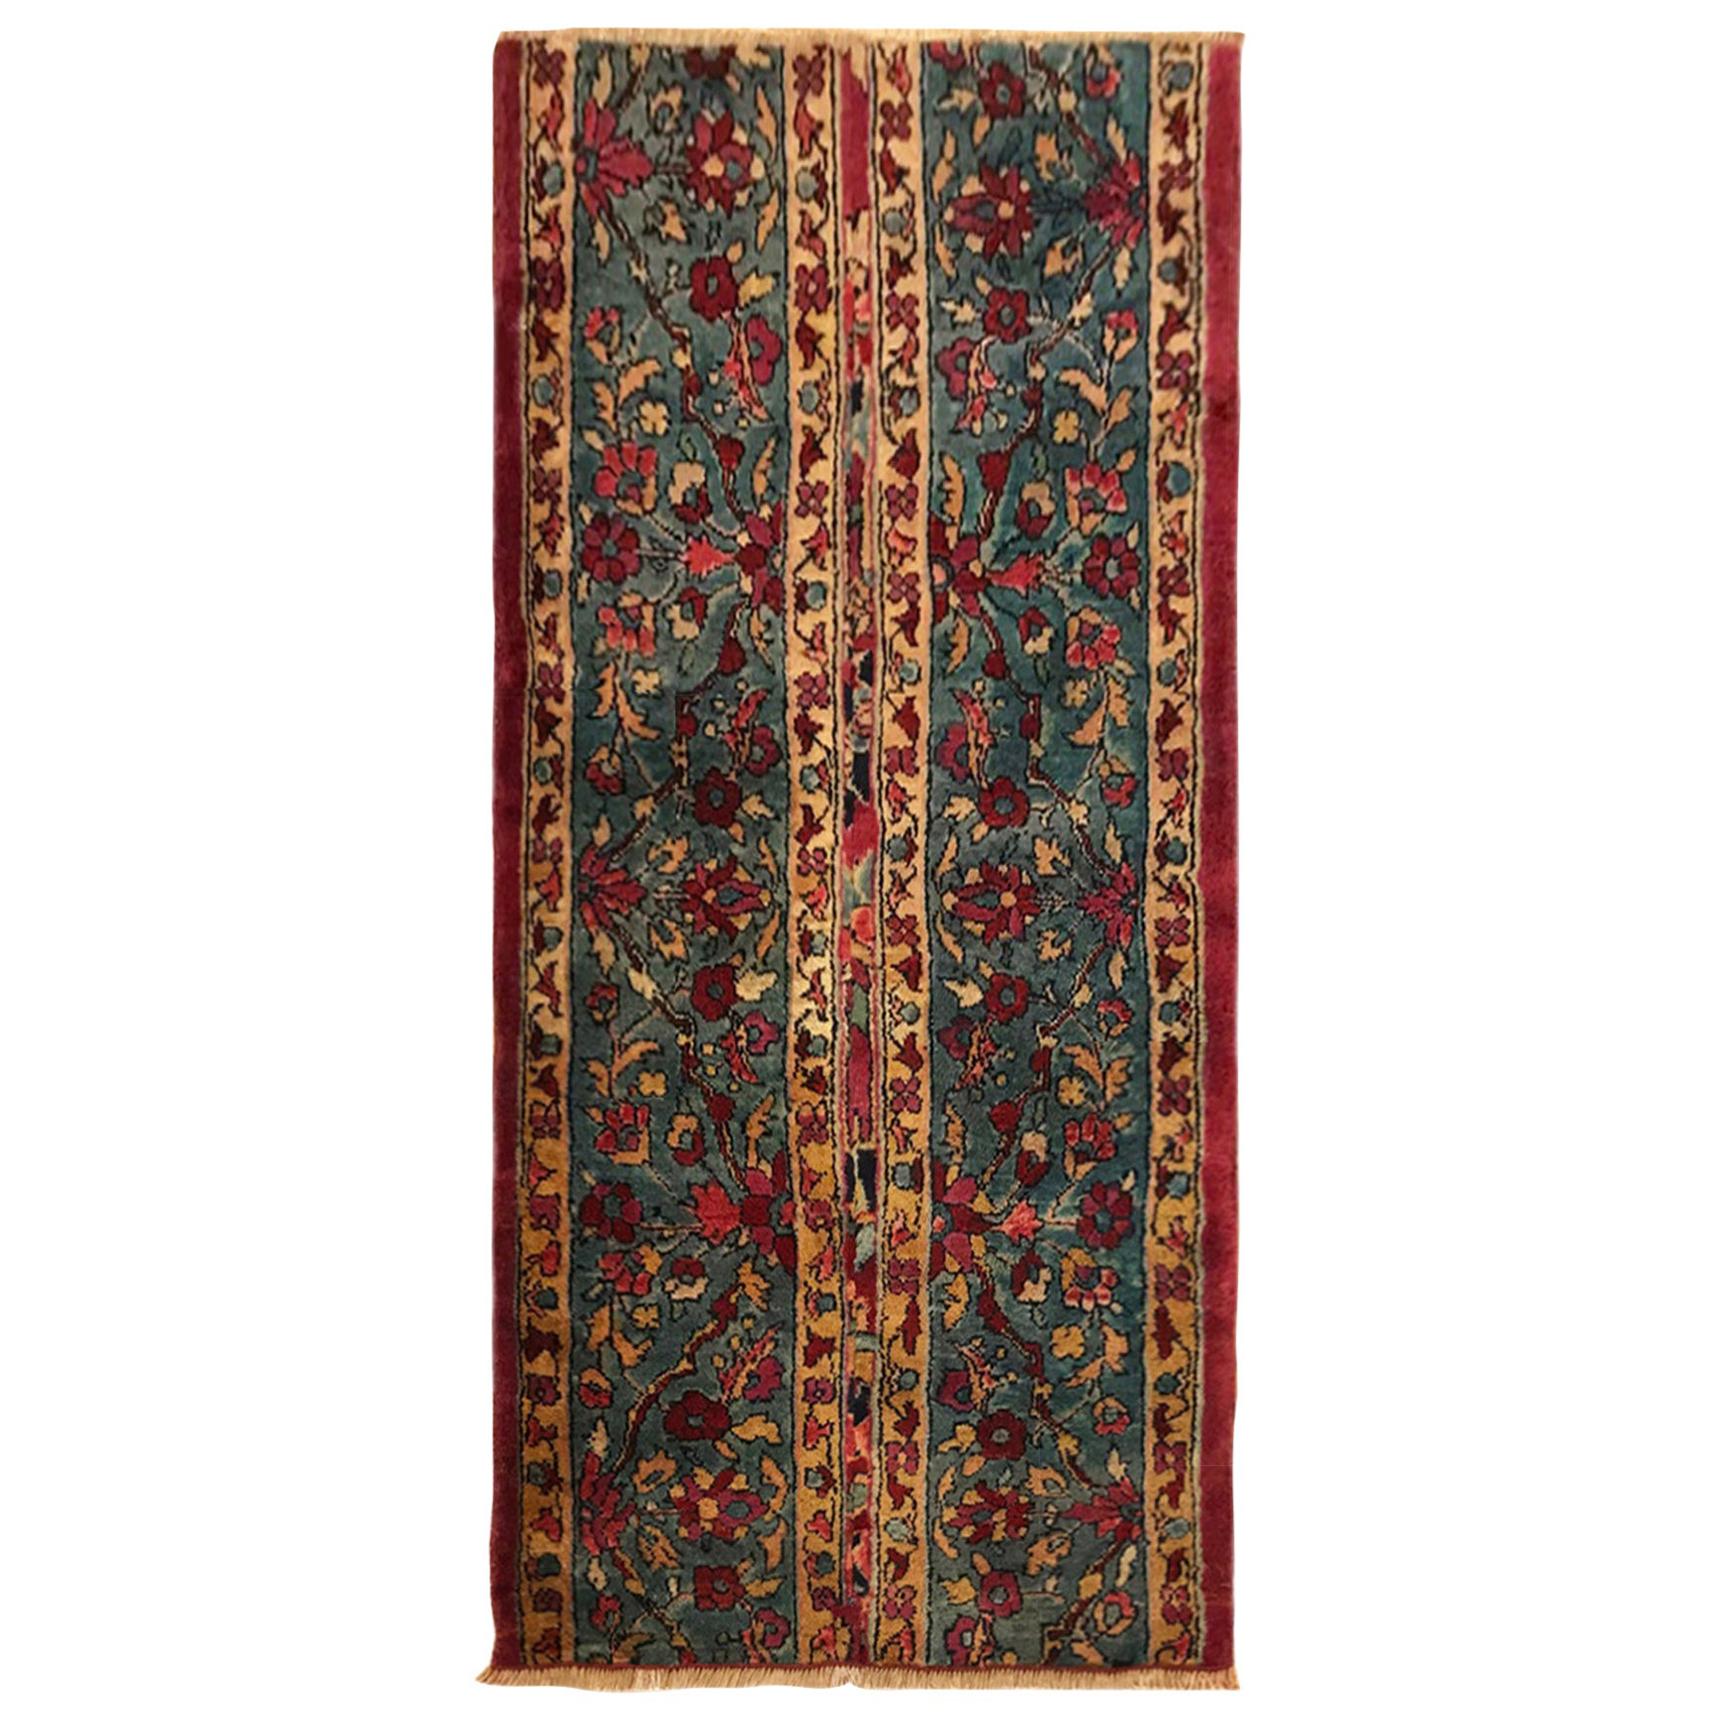 Antique Indian Agra Rug, Small Runner Size, Symmetrical Bands of Color, Flowers